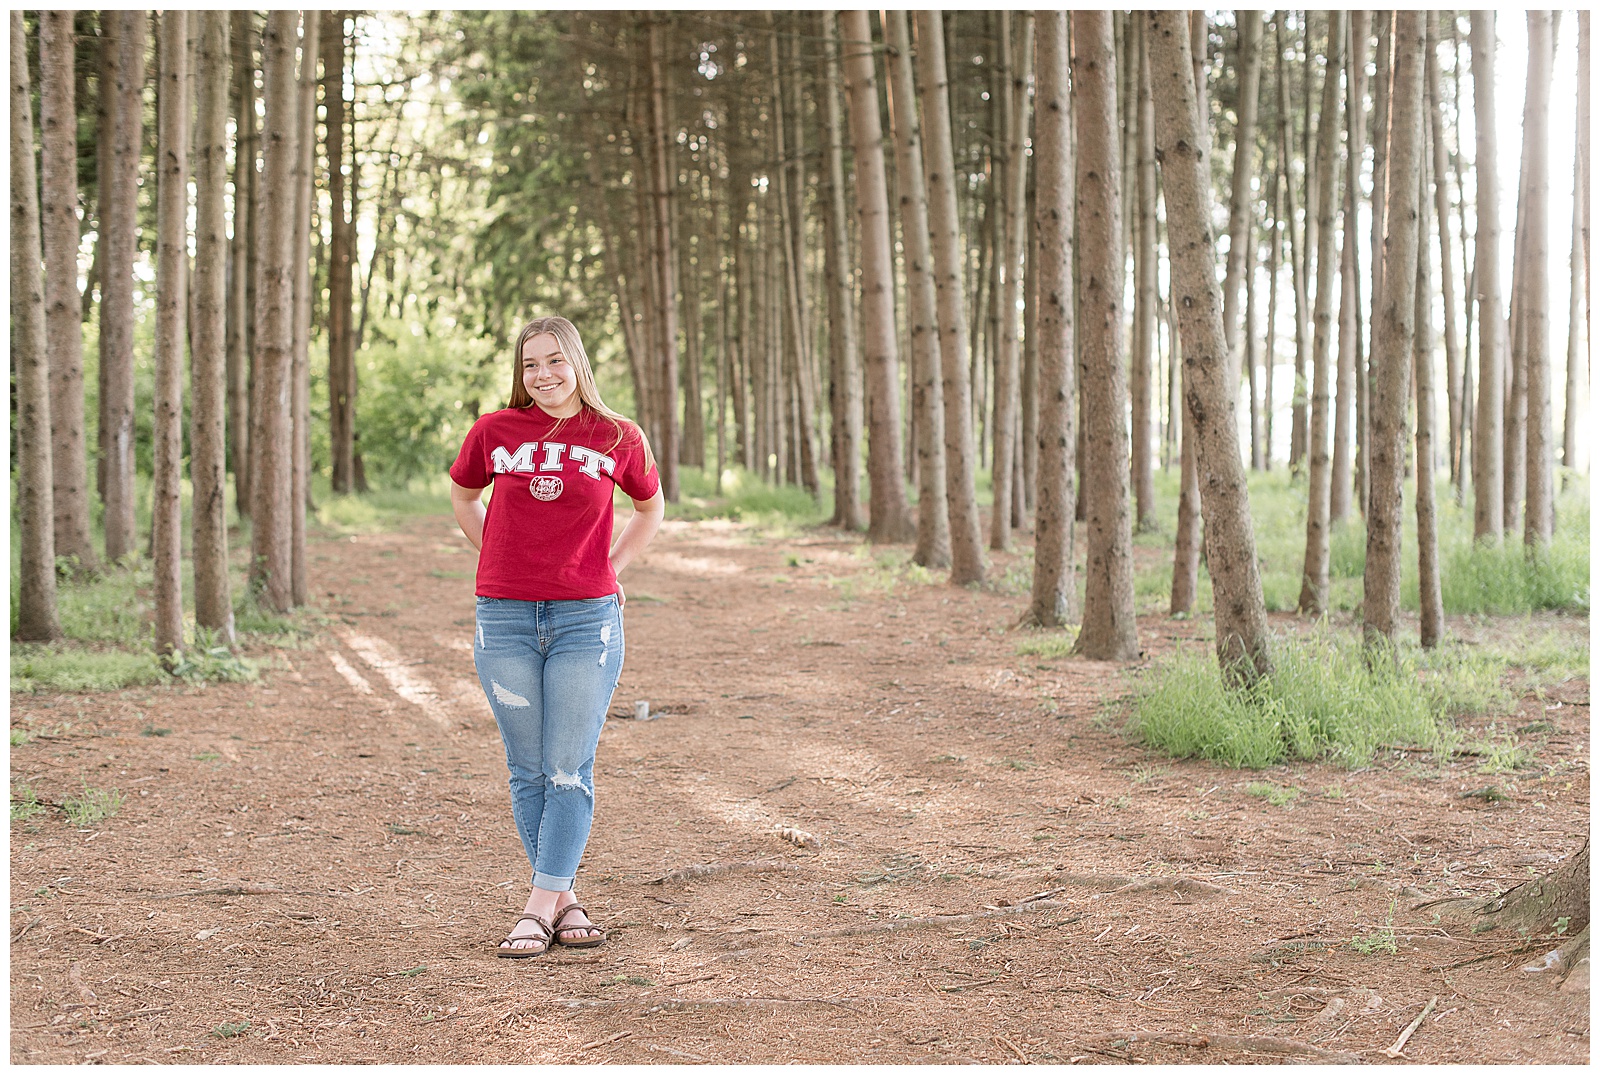 senior girl in red MIT tshirt and blue jeans standing among pine tree grove at overlook park